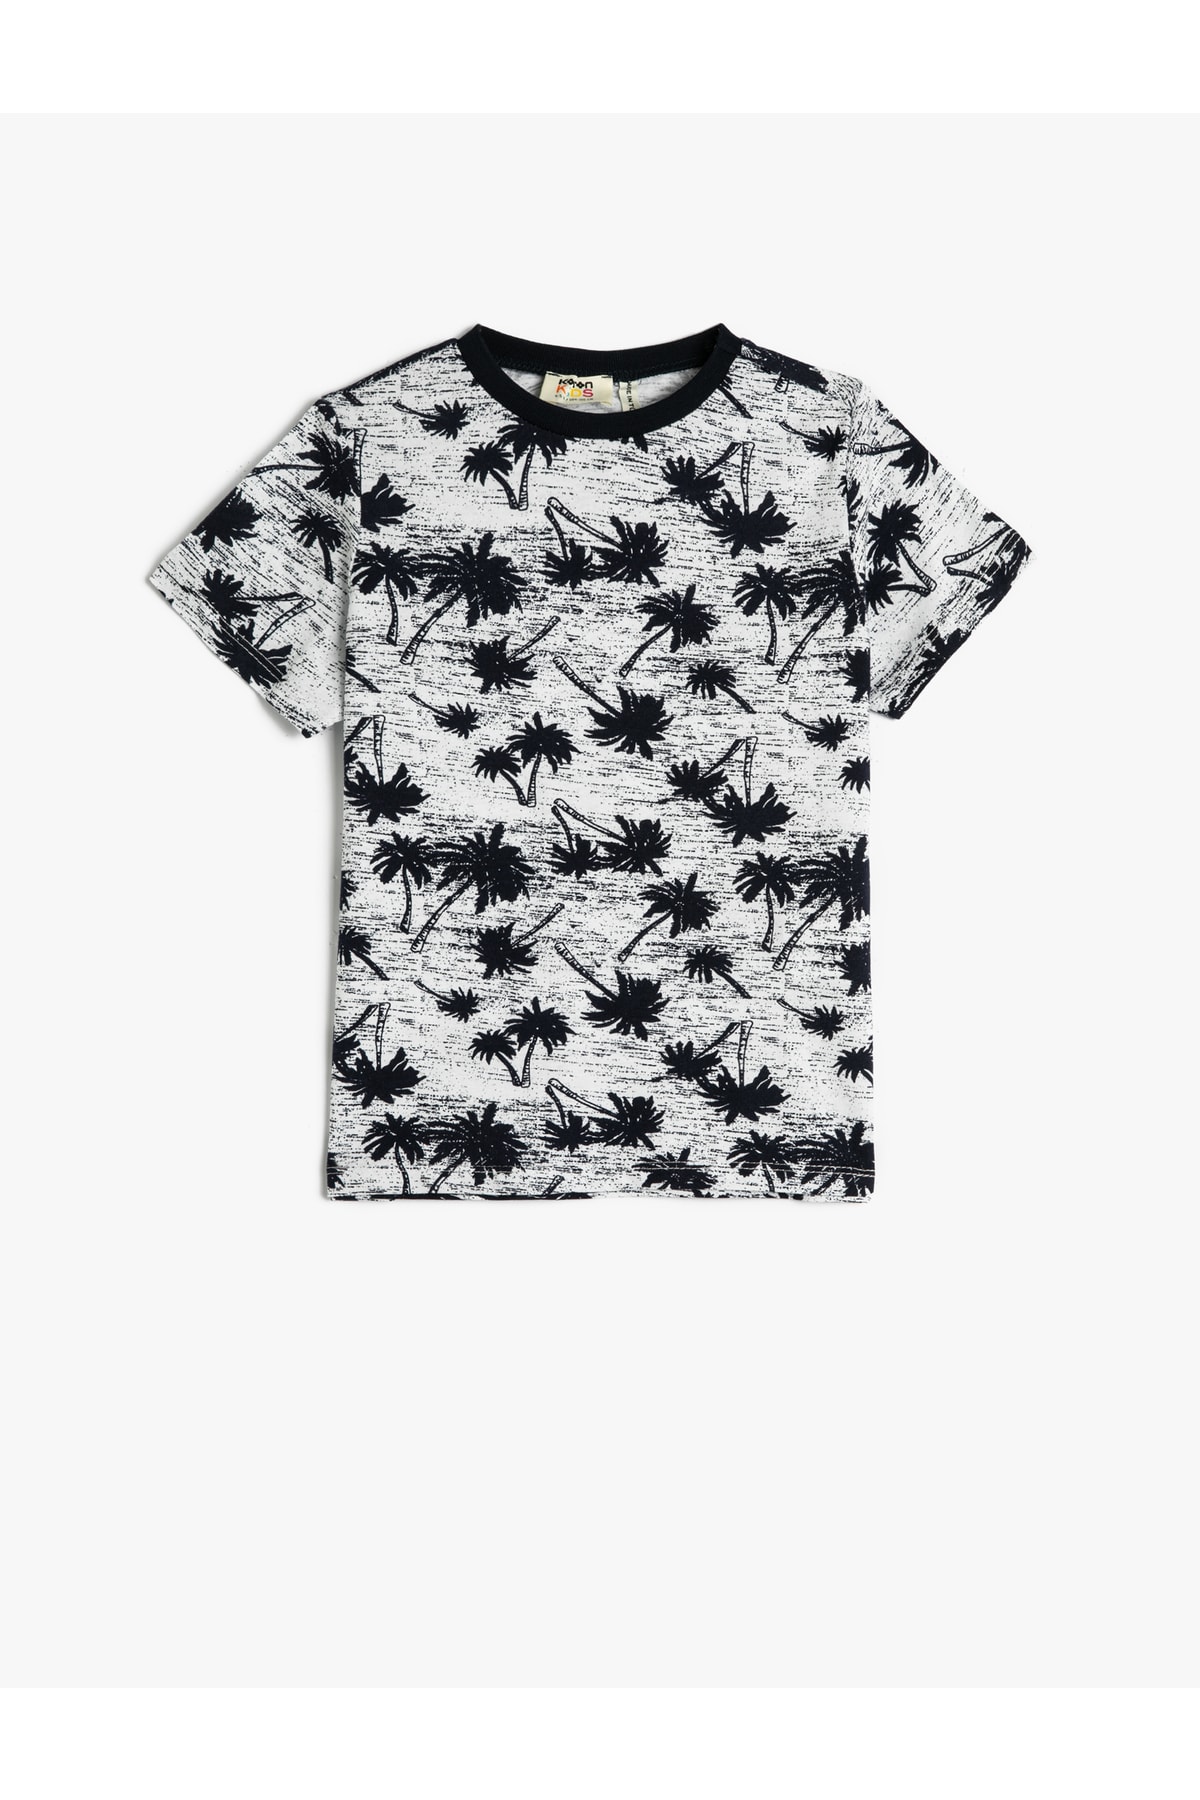 Koton T-shirt with Short Sleeves, Crew Neck Palm Print, Cotton